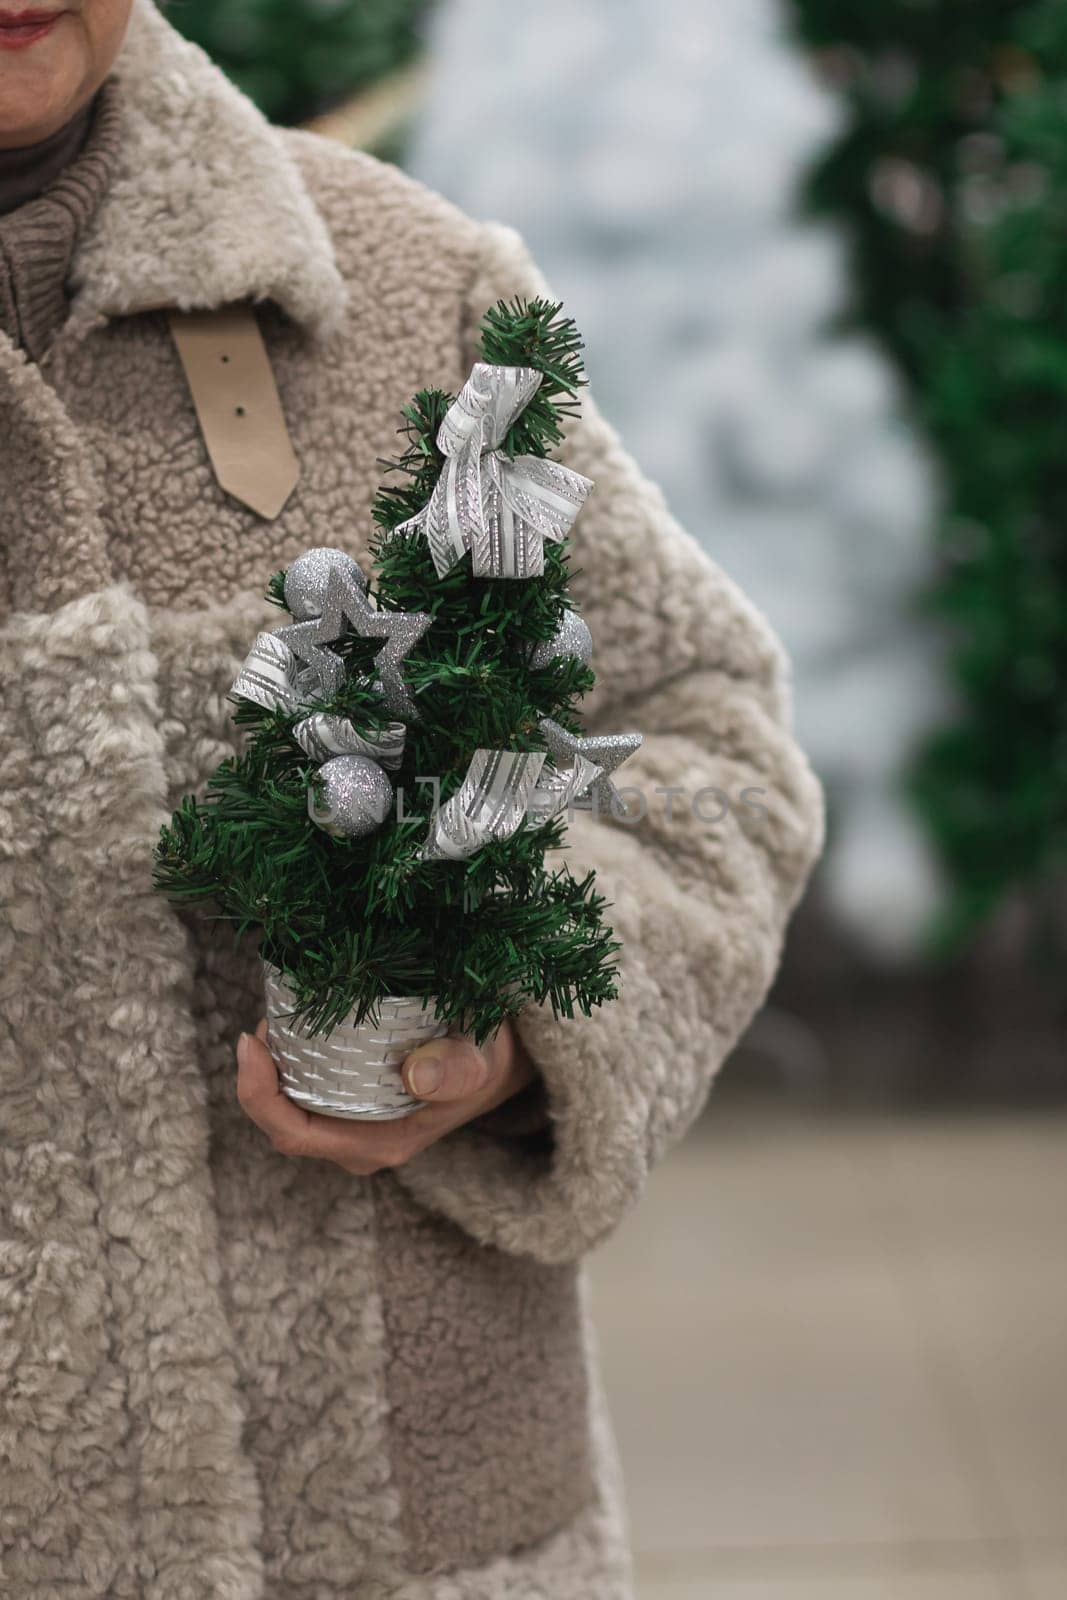 A woman in a fur coat holds a small artificial Christmas tree in her hands by ElenaNEL